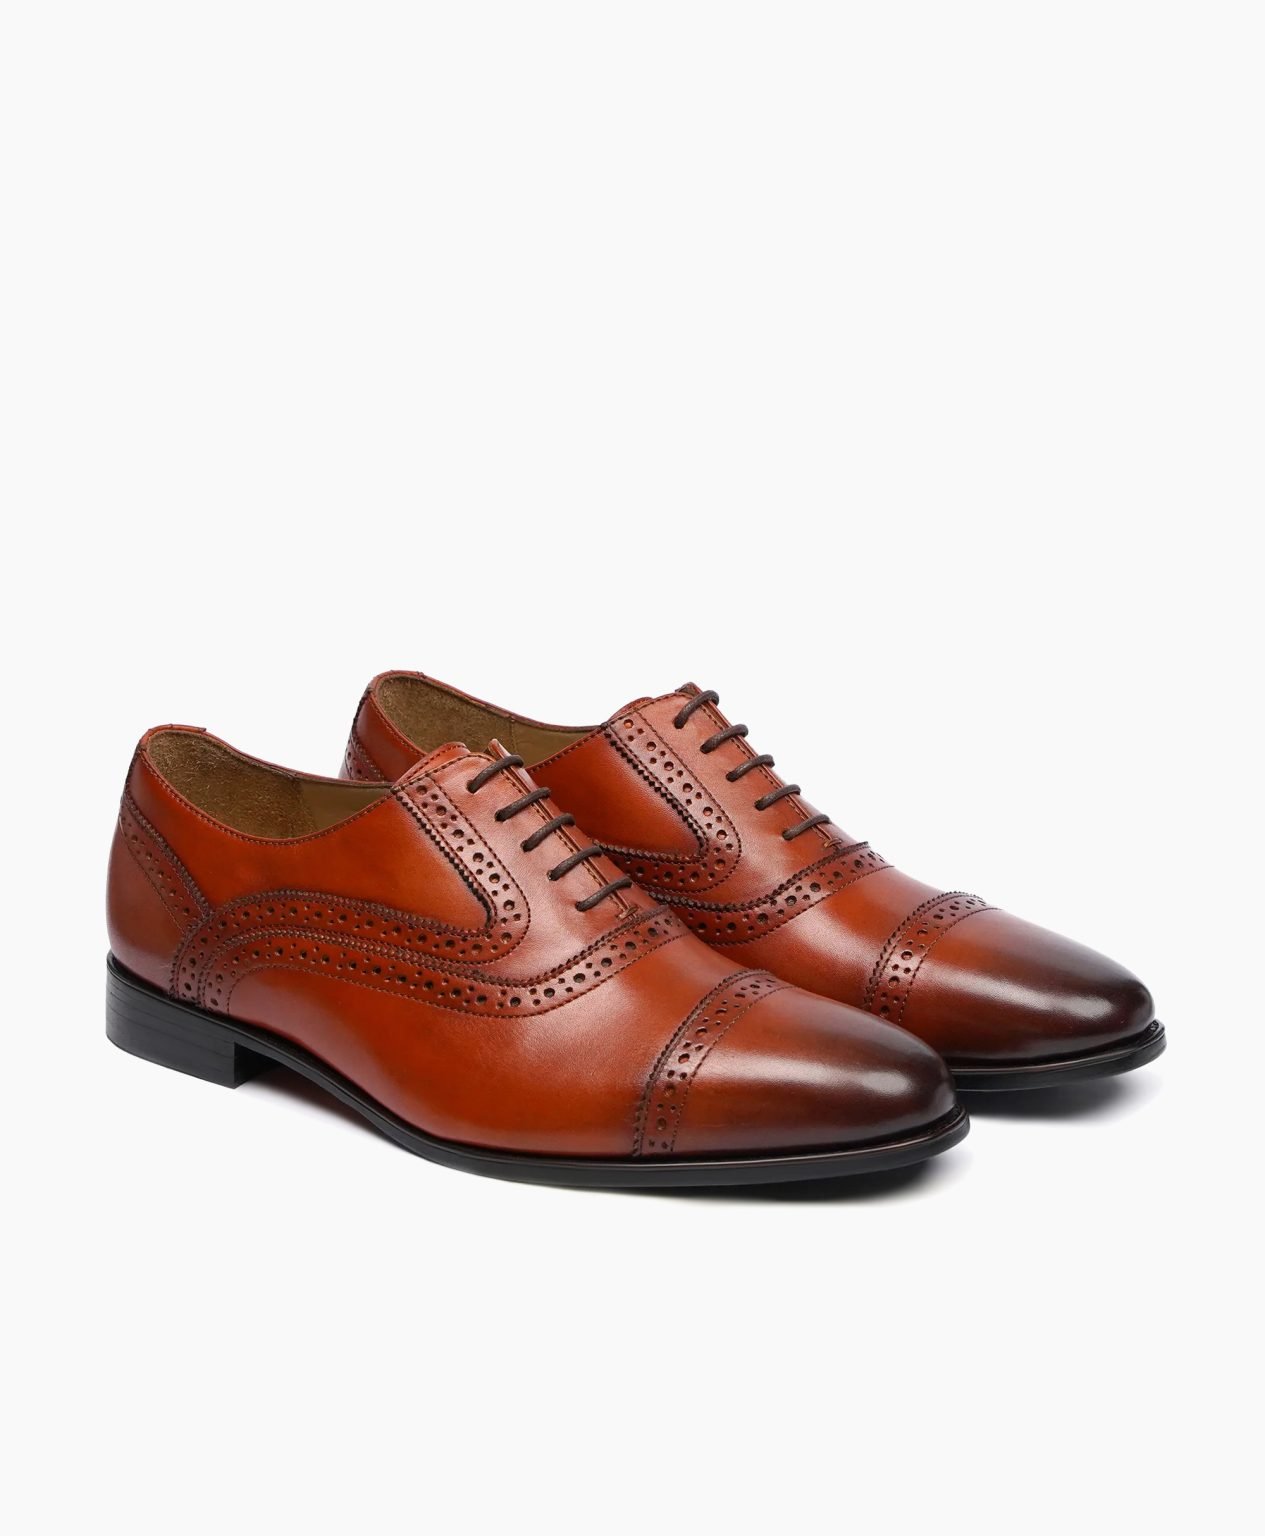 chester-oxford-tan-brown-leather-shoes-image200